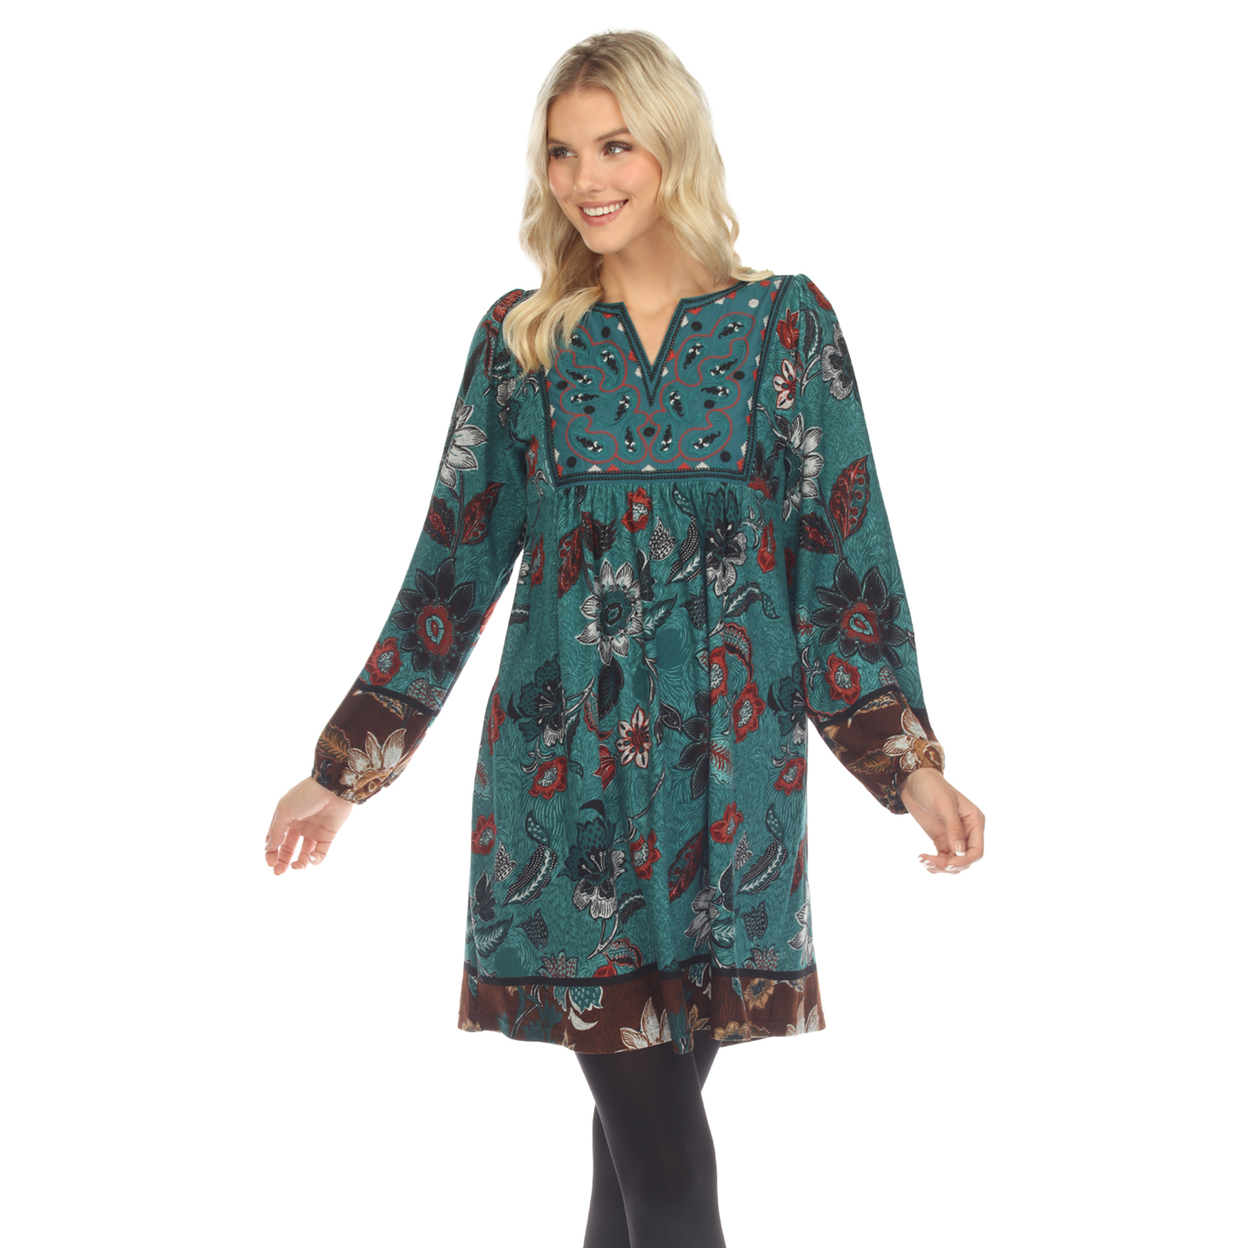 White Mark Women's Floral Paisley Sweater Dress - Teal, 3x